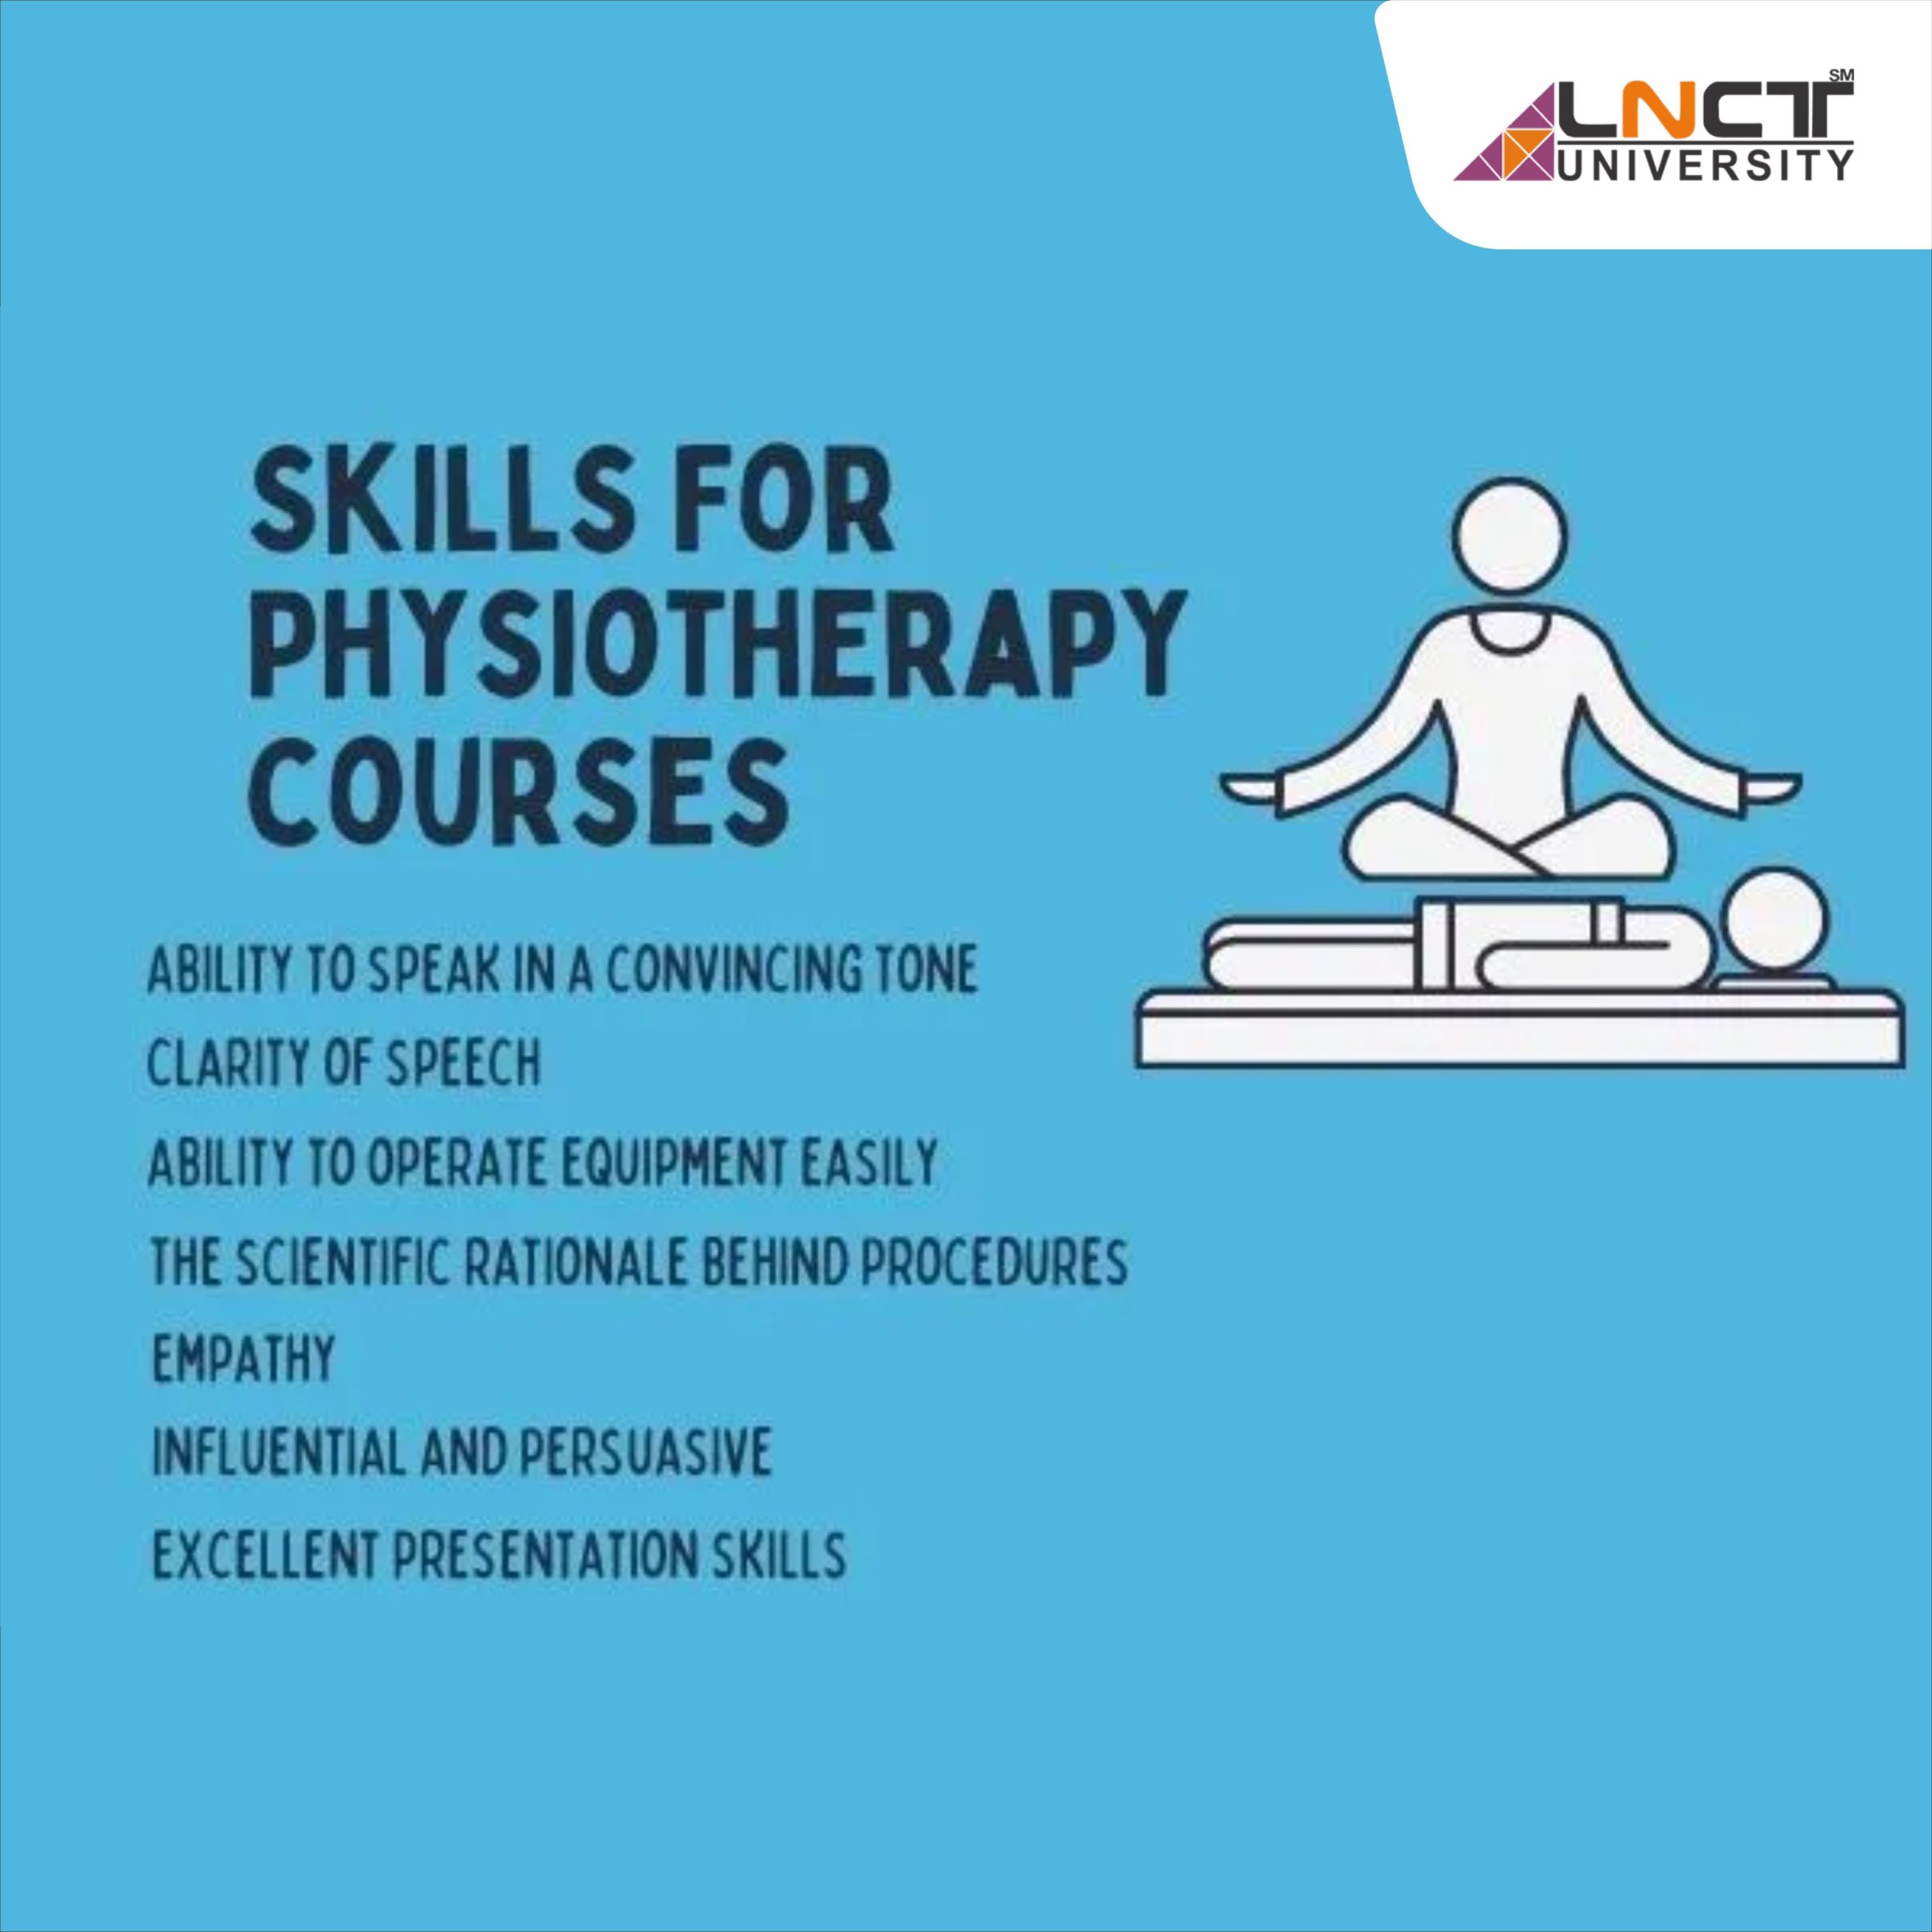 Best Scope And Career of Bachelor of Physiotherapy in 2021